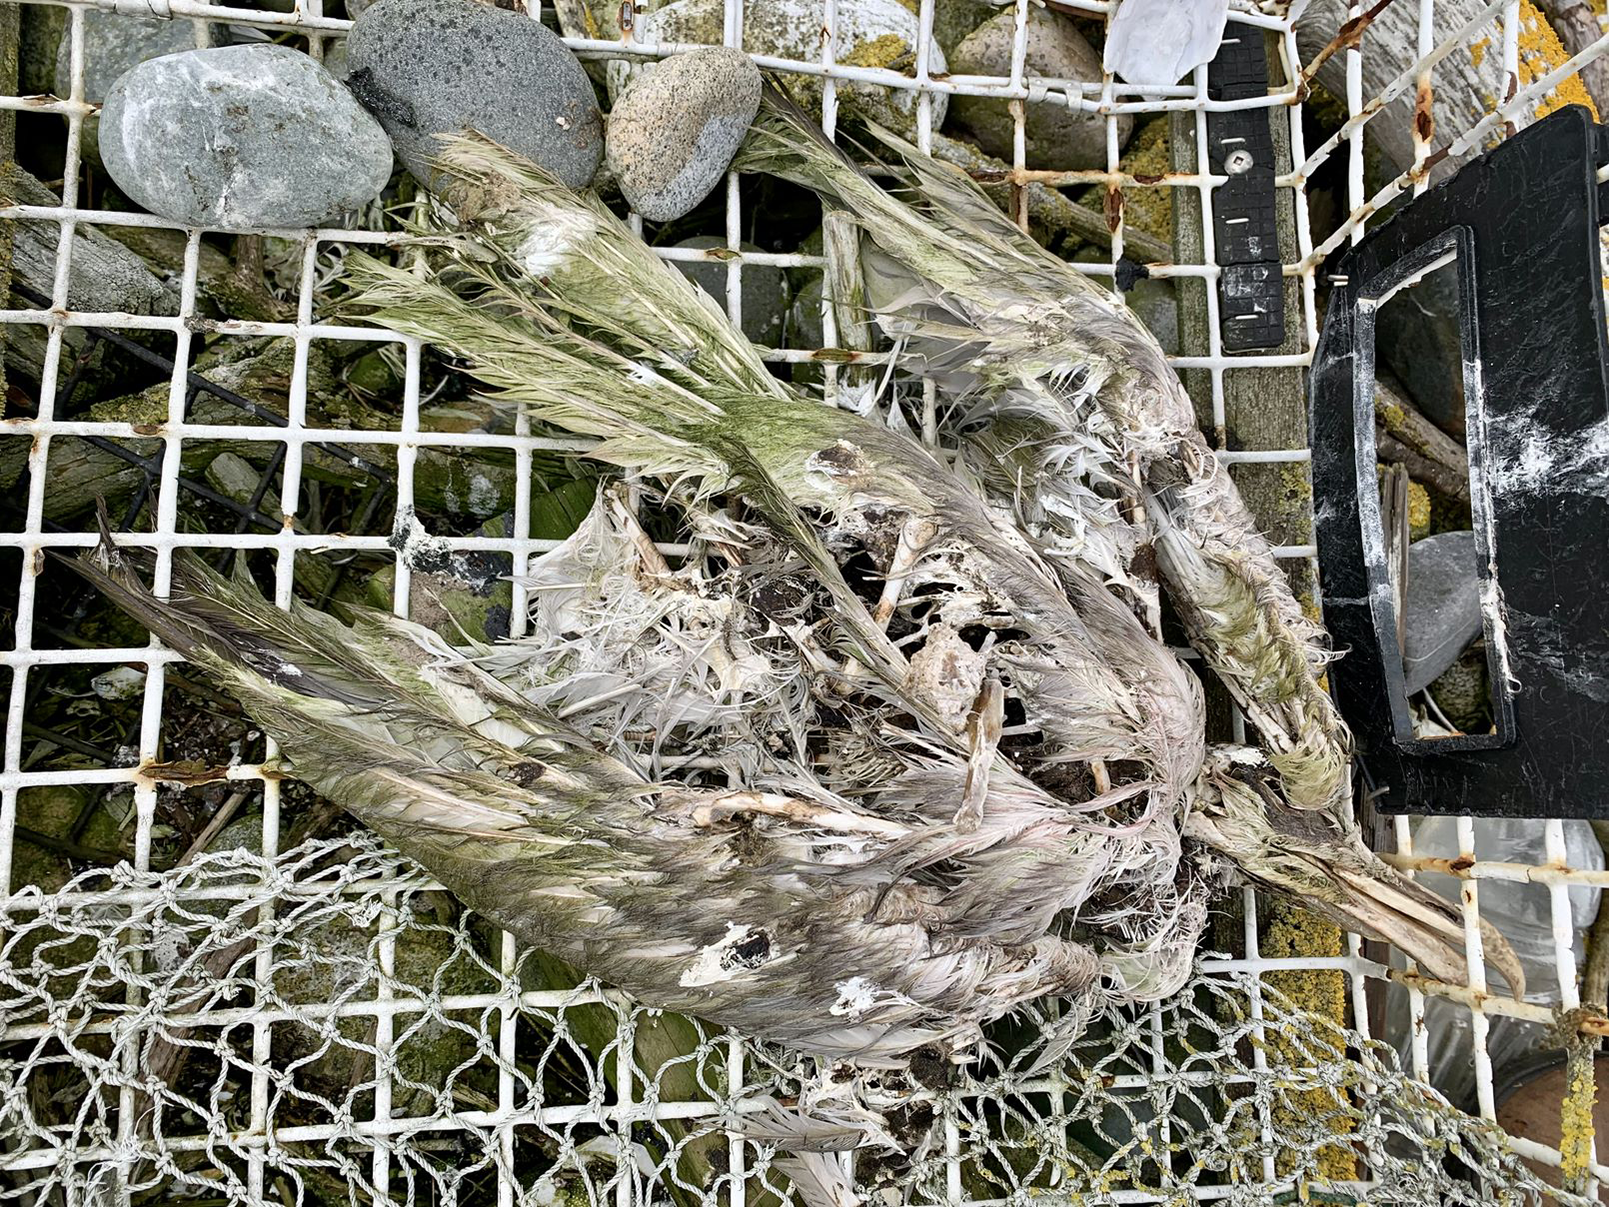 the remains on a dead bird on a lobster trap